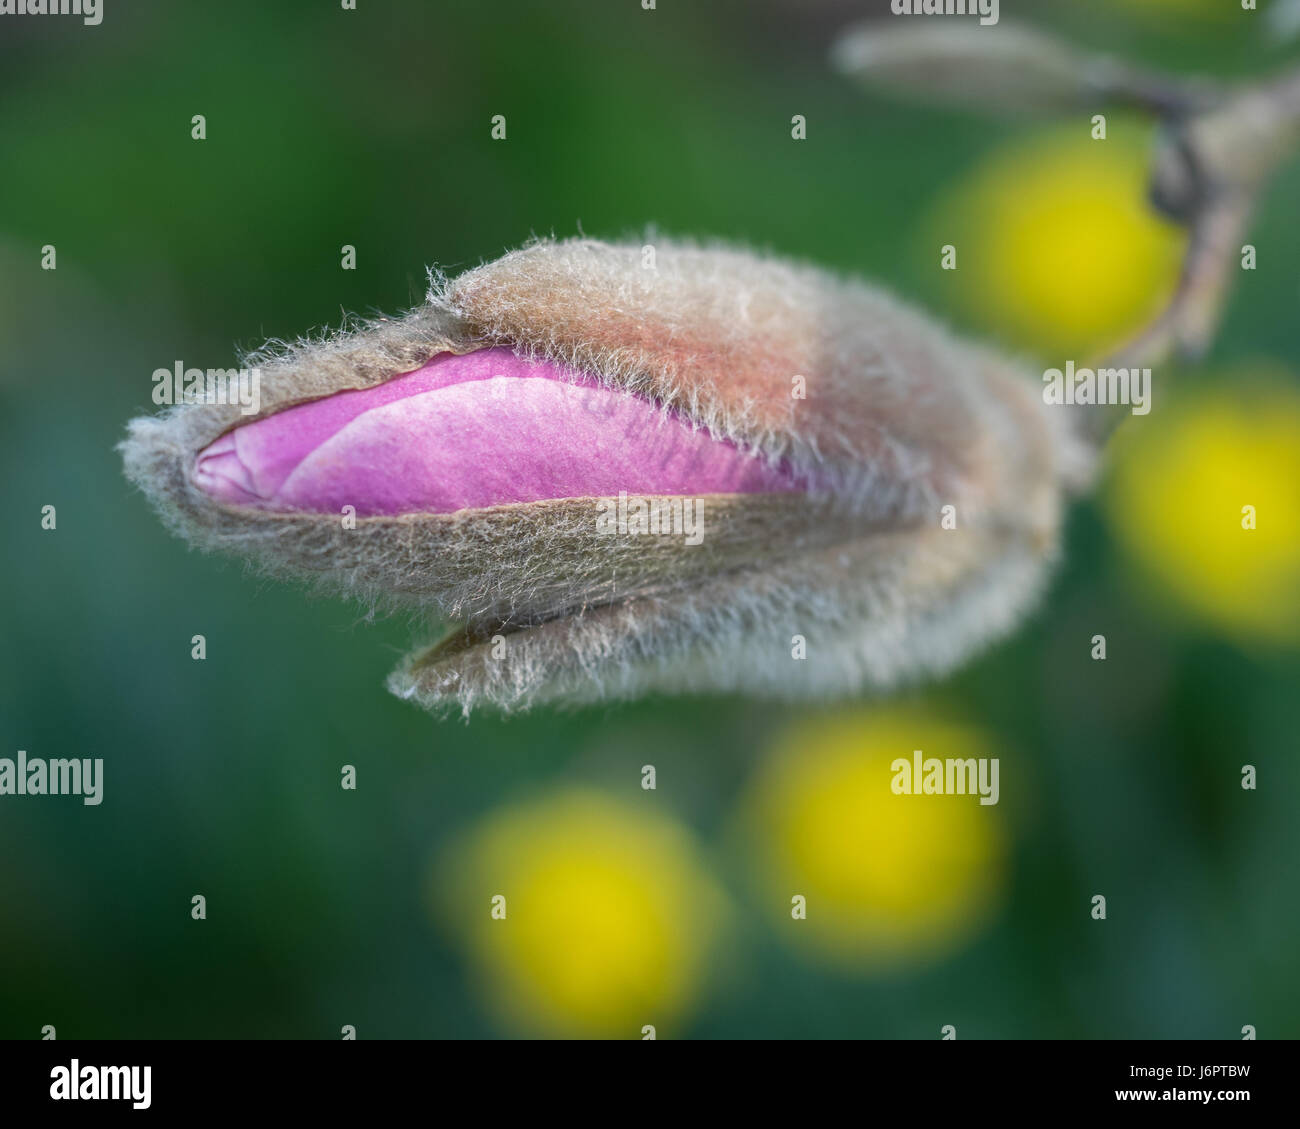 a close up macro detail Magnolia bud and sepals budding opening blooming blossoming pink purple mauve in spring Stock Photo